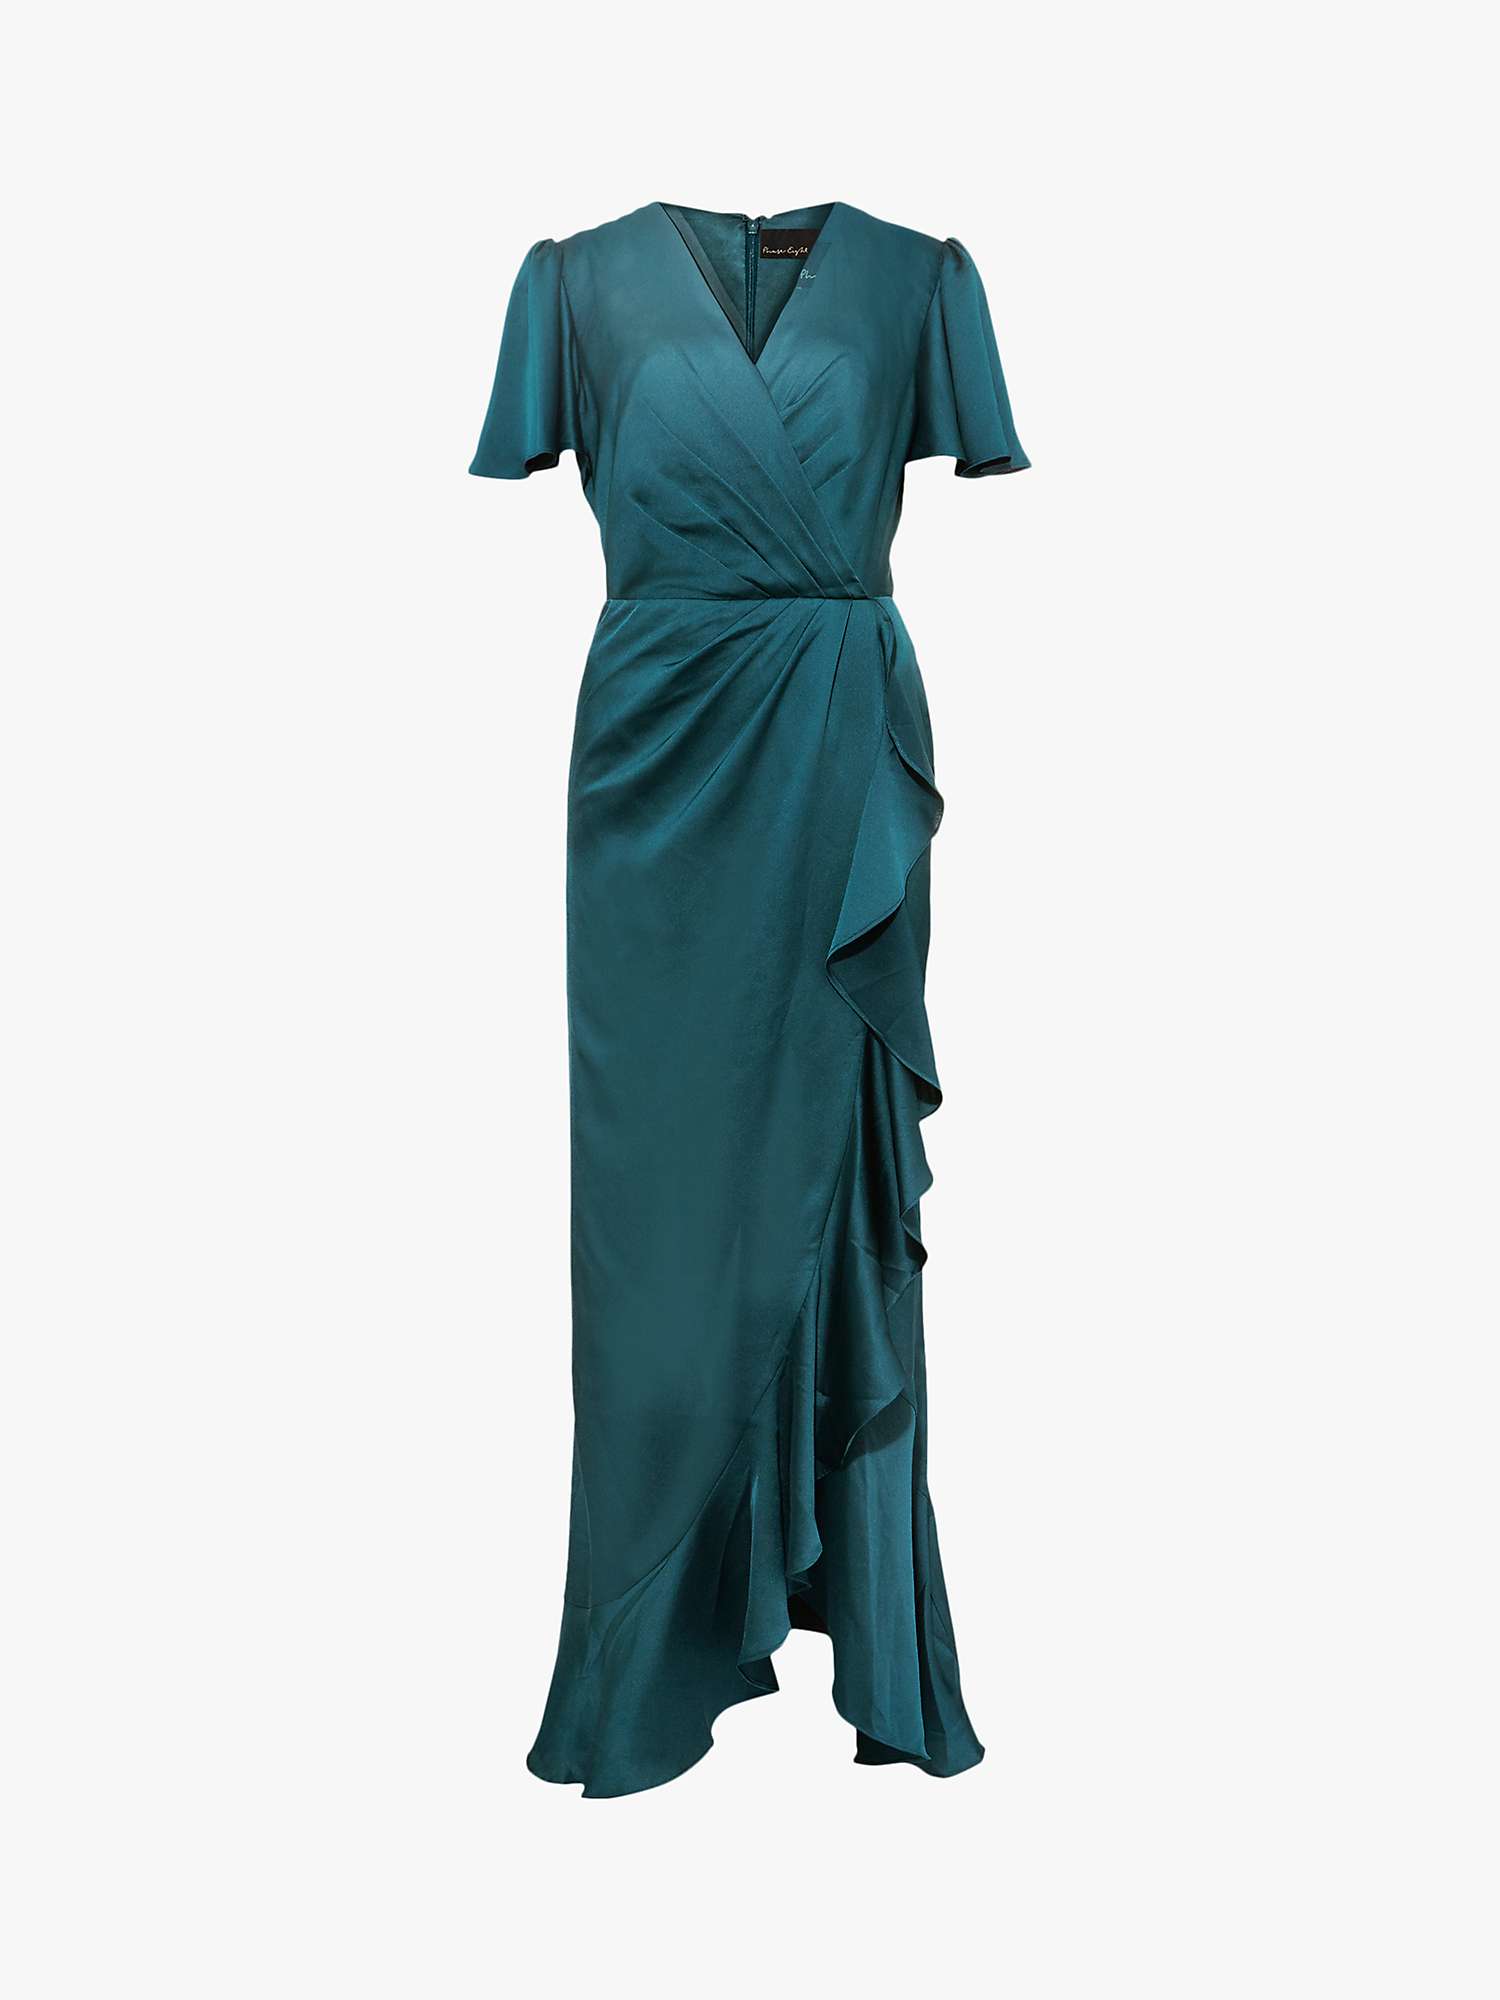 Buy Phase Eight Philippa Frill Maxi Dress, Peacock Green Online at johnlewis.com